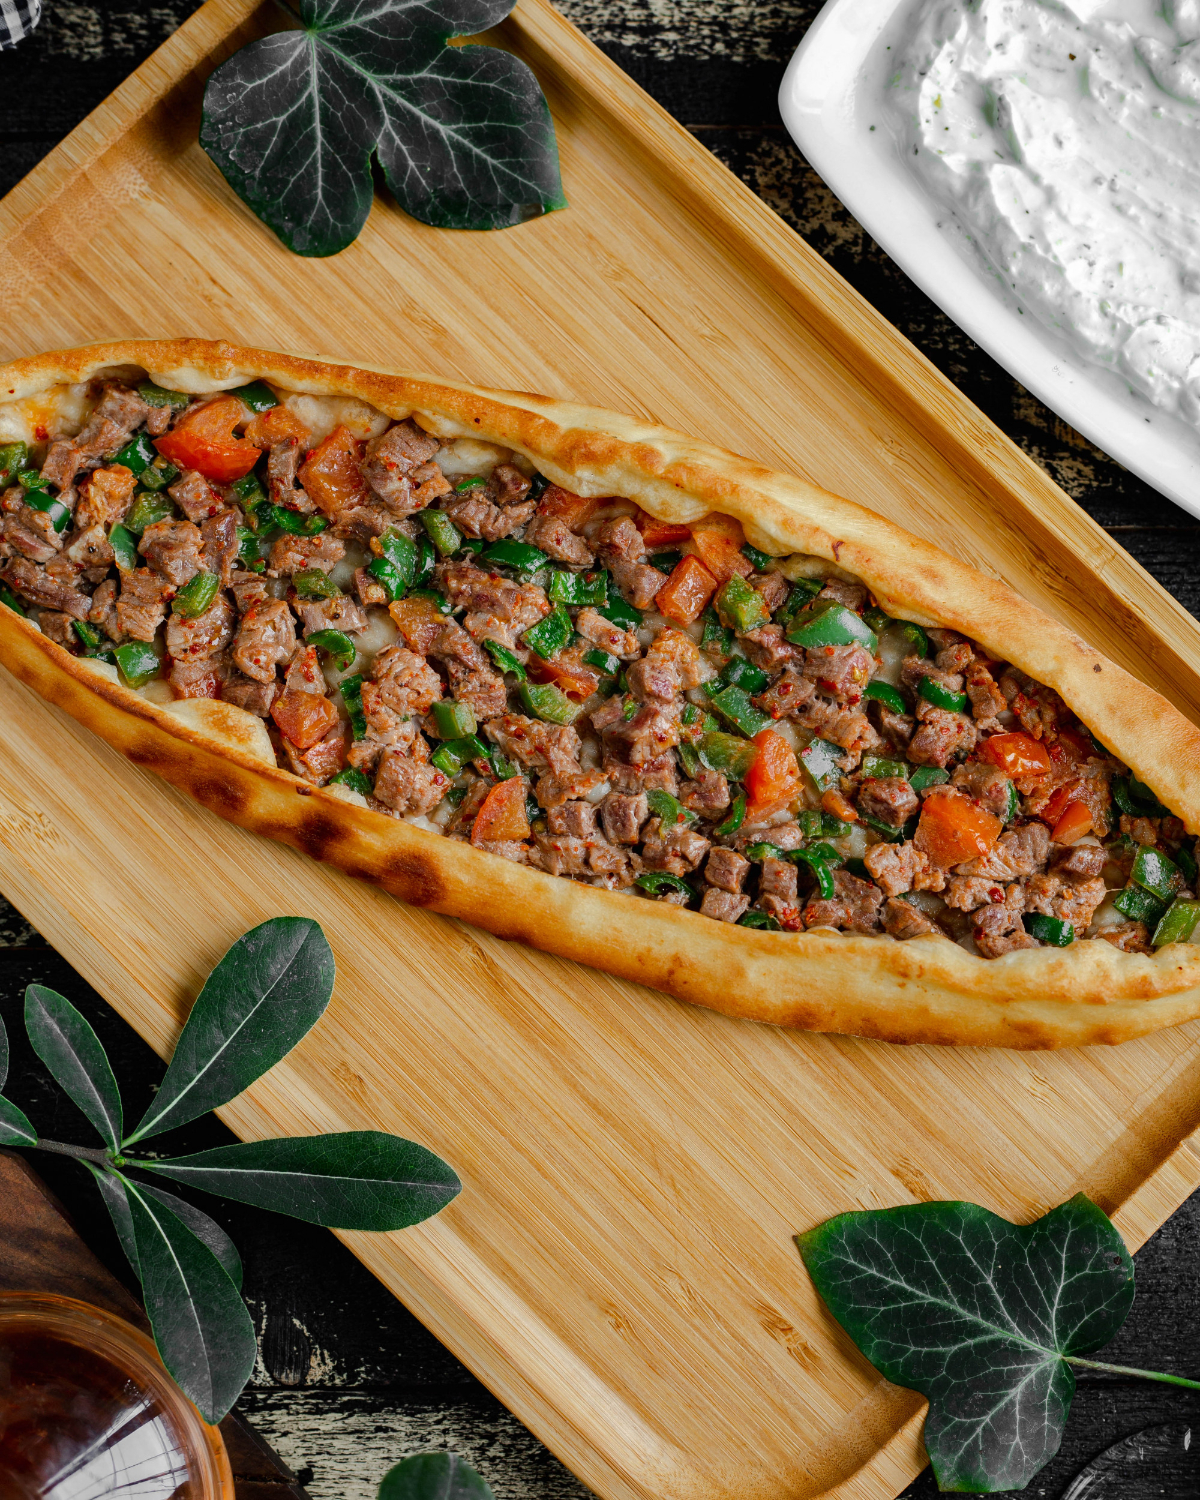 turkish pide pizza with meat vegetable stuffing inside wooden tray